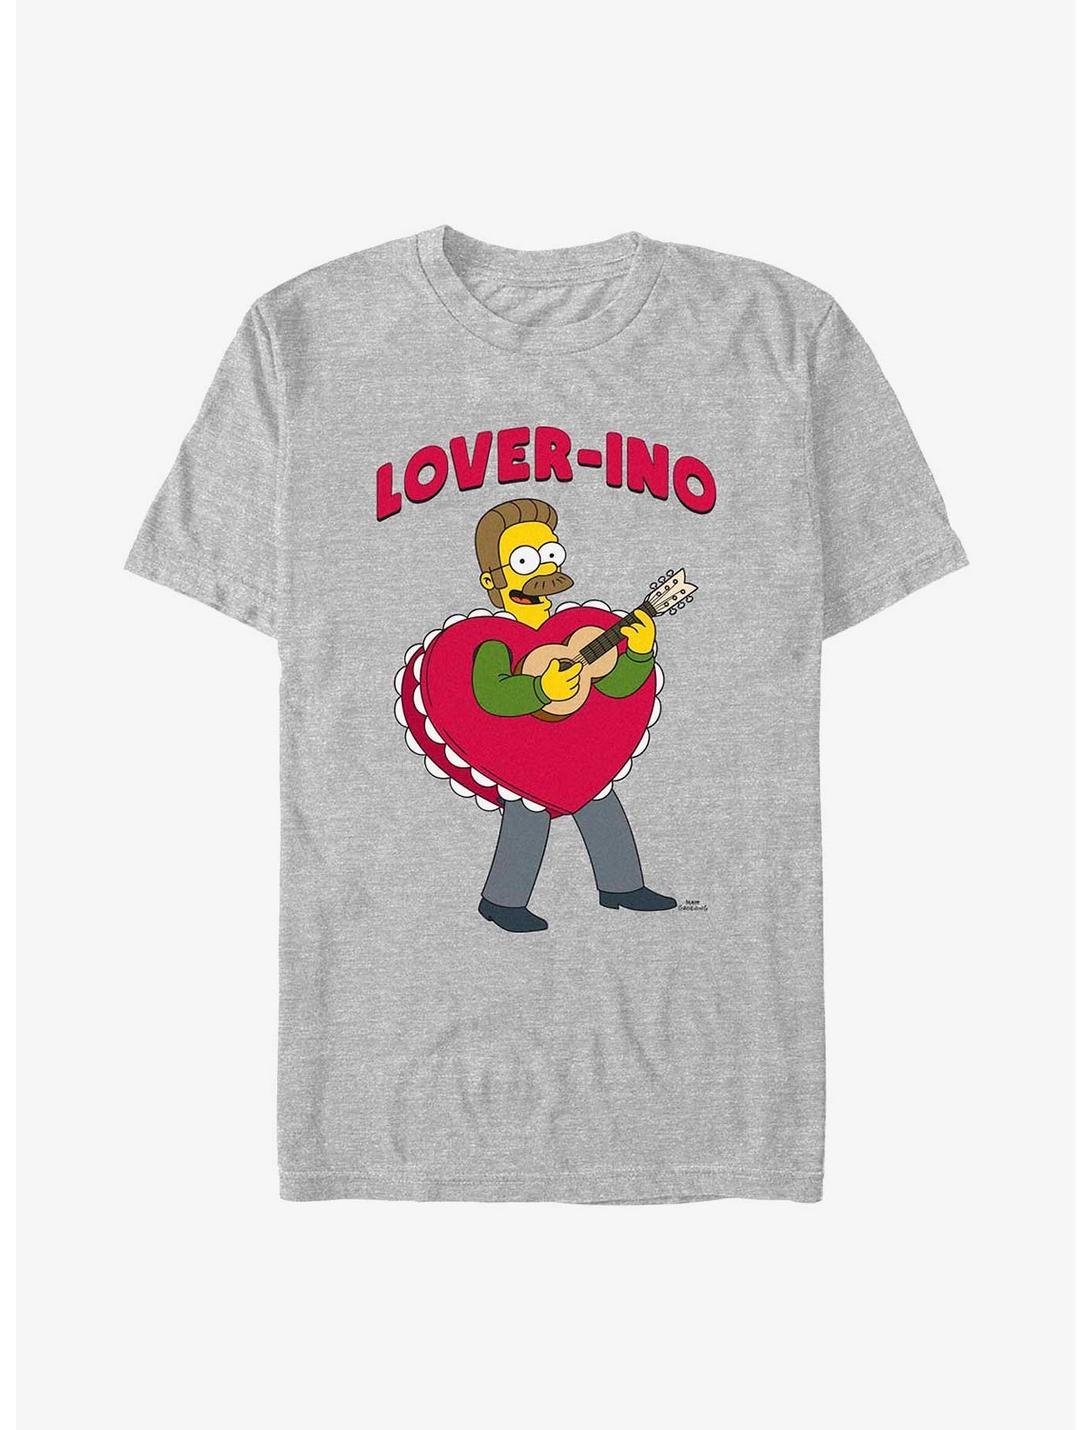 The Simpsons Flanders Lover-Ino T-Shirt, ATH HTR, hi-res